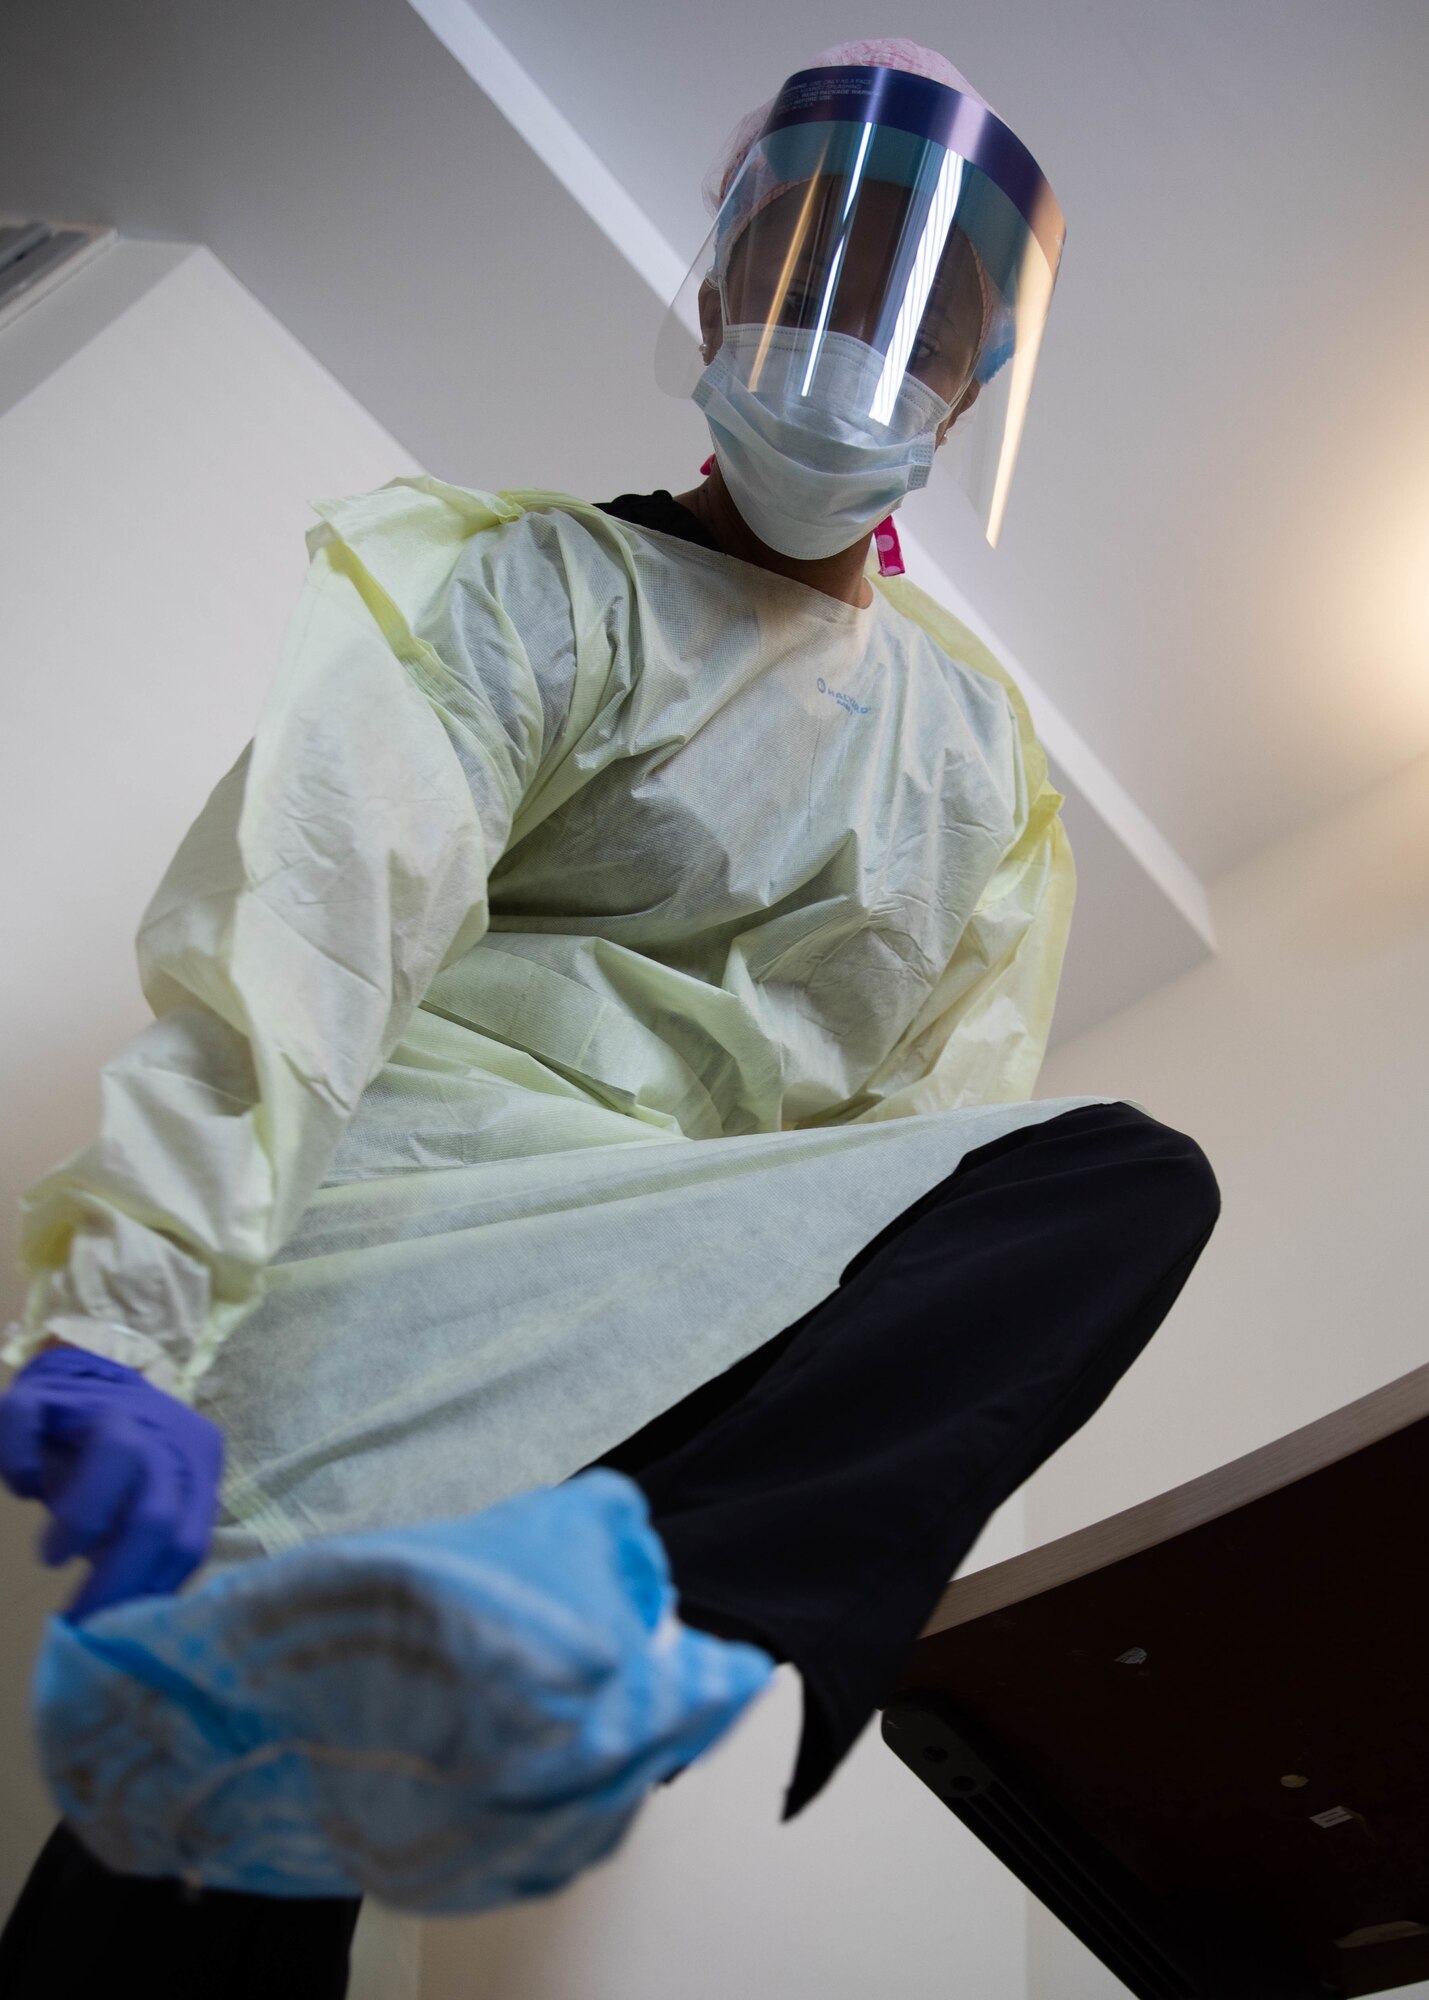 .S. Air Force Capt. Arielle Watson, assigned to the 94th Aeromedical Staging Squadron, removes personal protective equipment at Queens Hospital in Queens, N.Y., May 13, 2020.